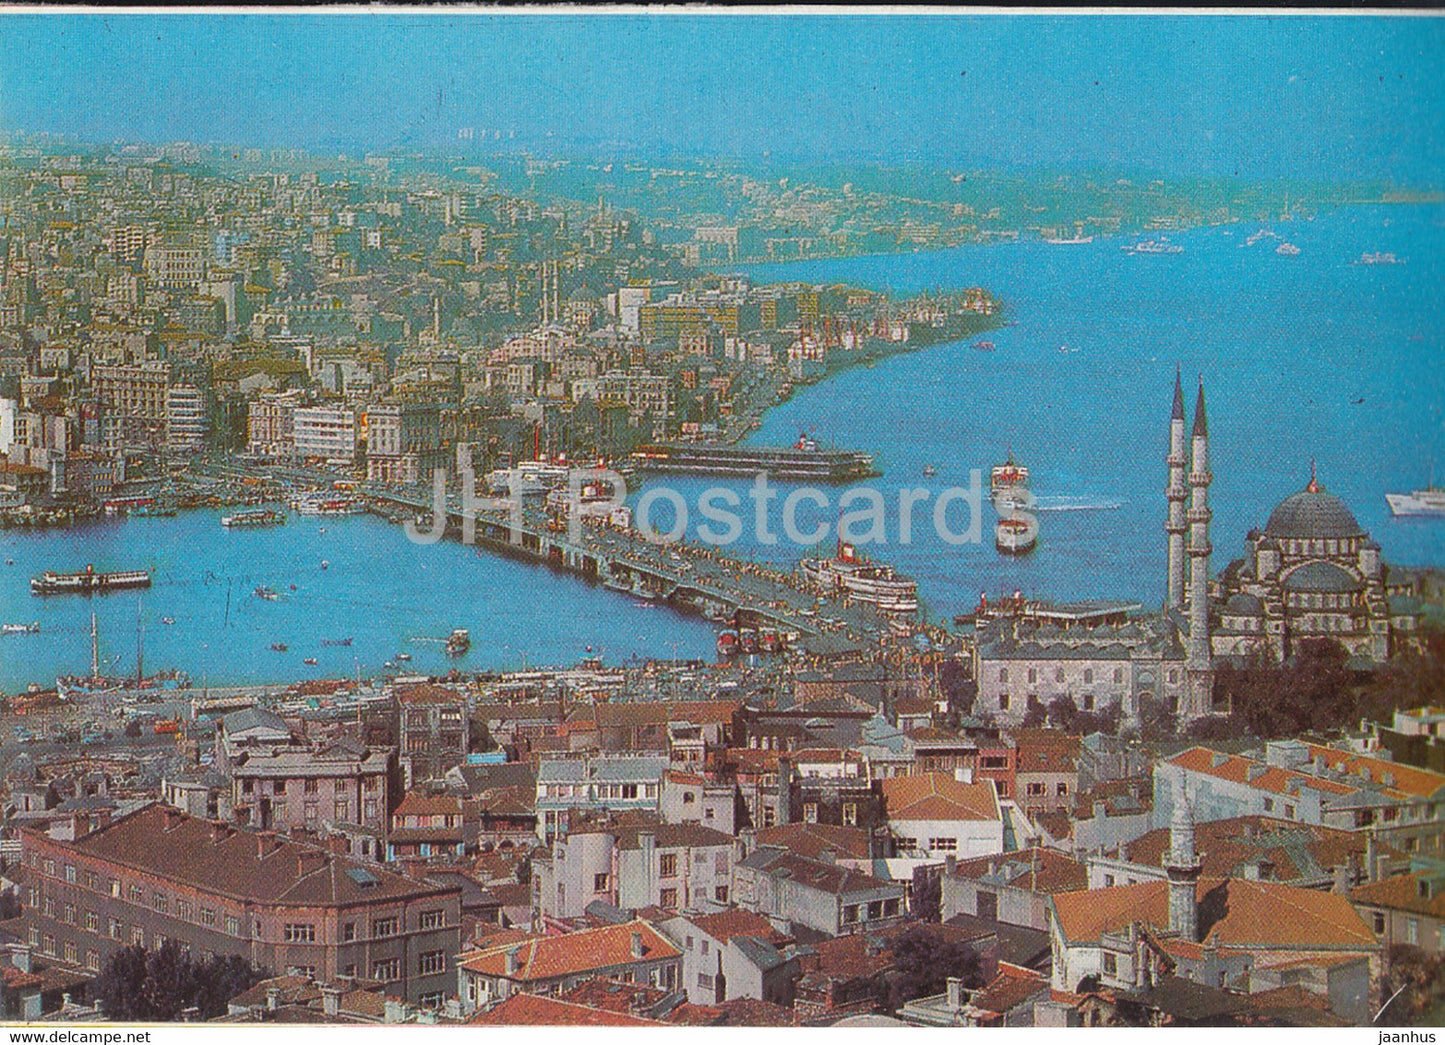 Istanbul - A View of the Galata Bridge - Bosphorus and scutary - Turkey - unused - JH Postcards